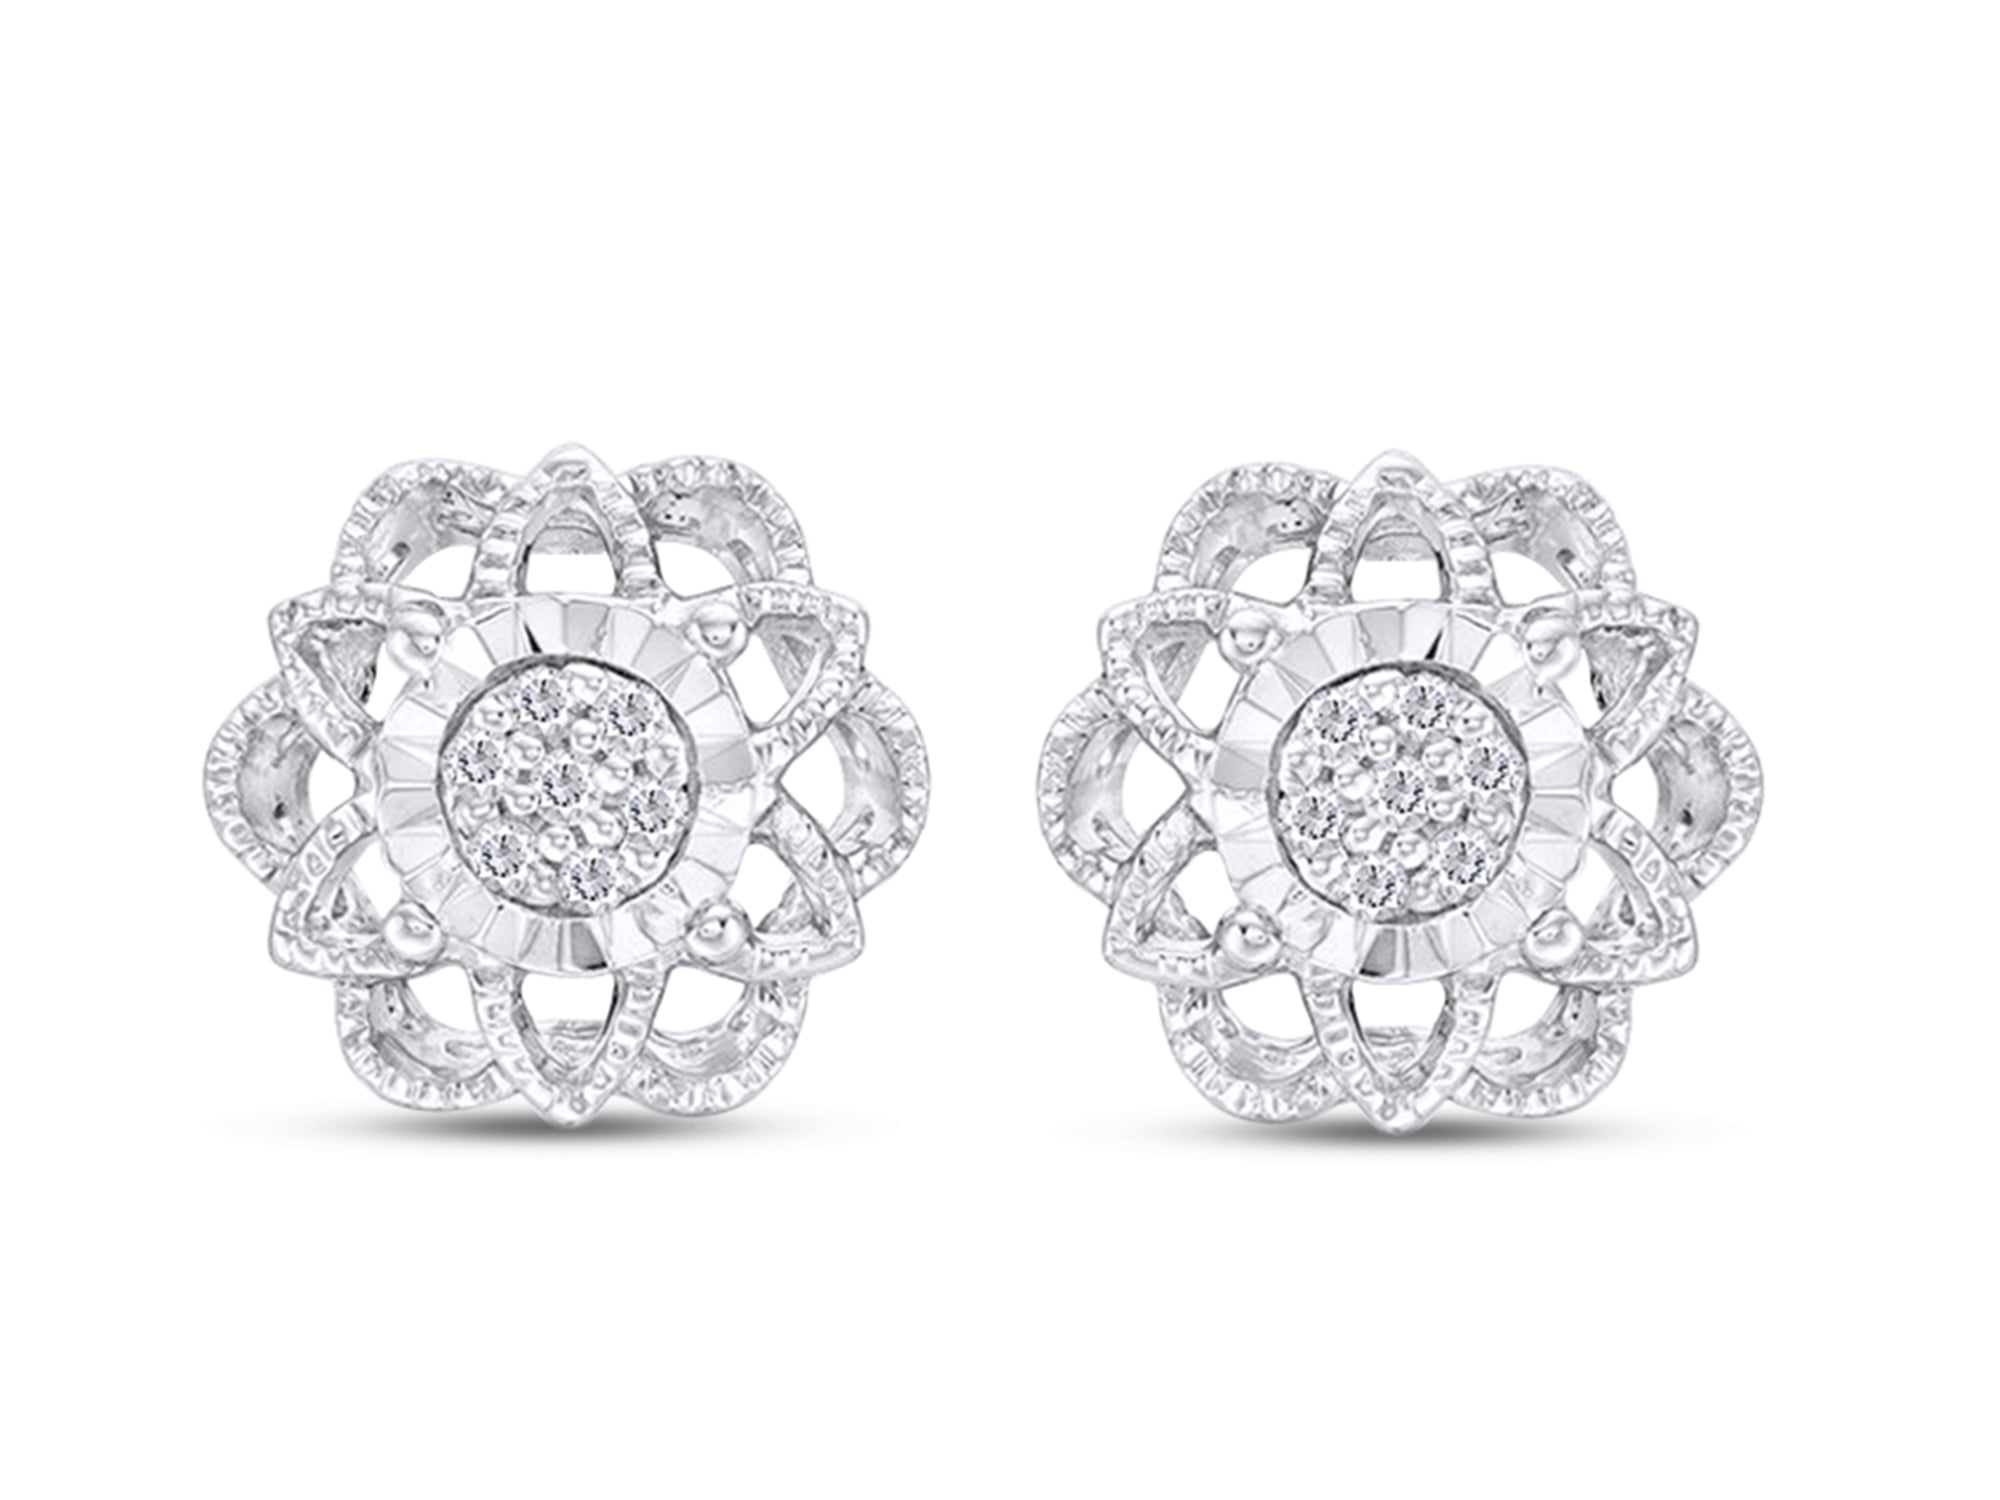 Share more than 174 vintage style diamond earrings best